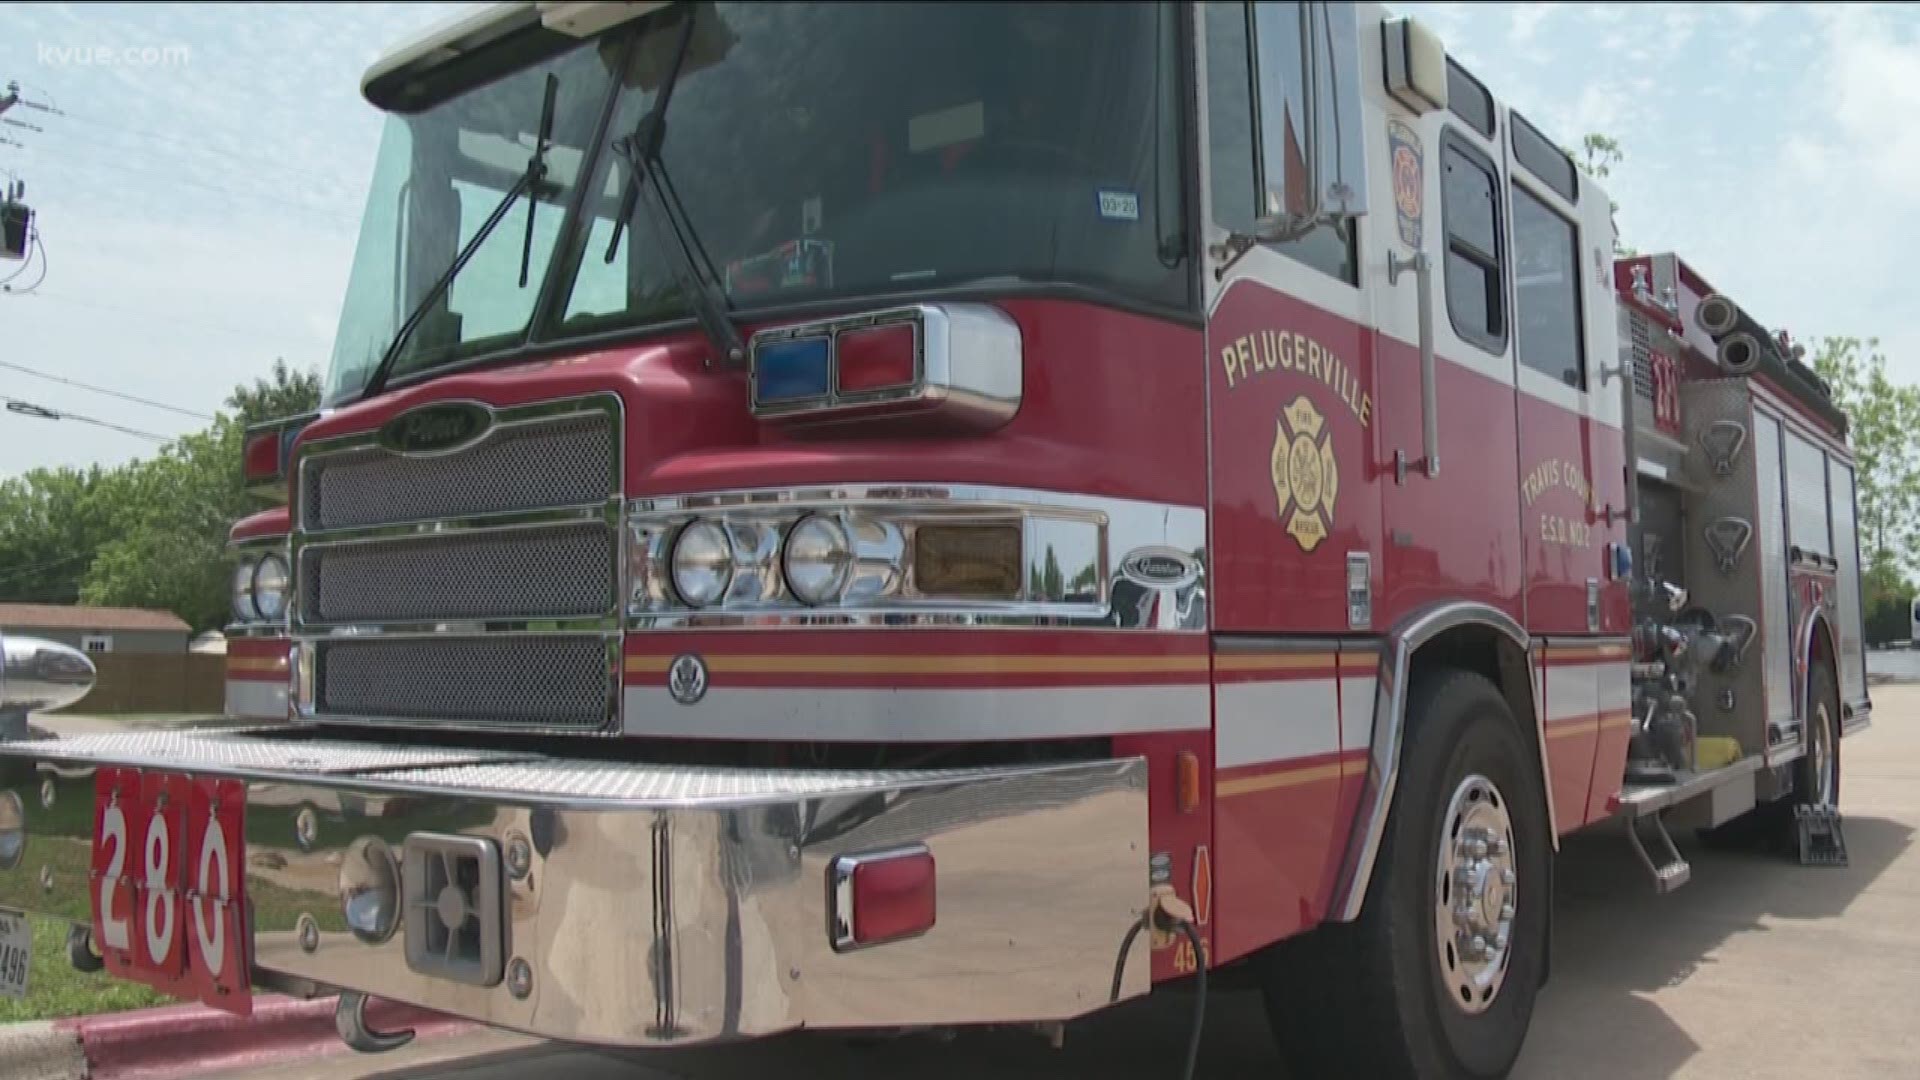 Two Pflugerville firefighters are expected to return to work this week after recovering from coronavirus.